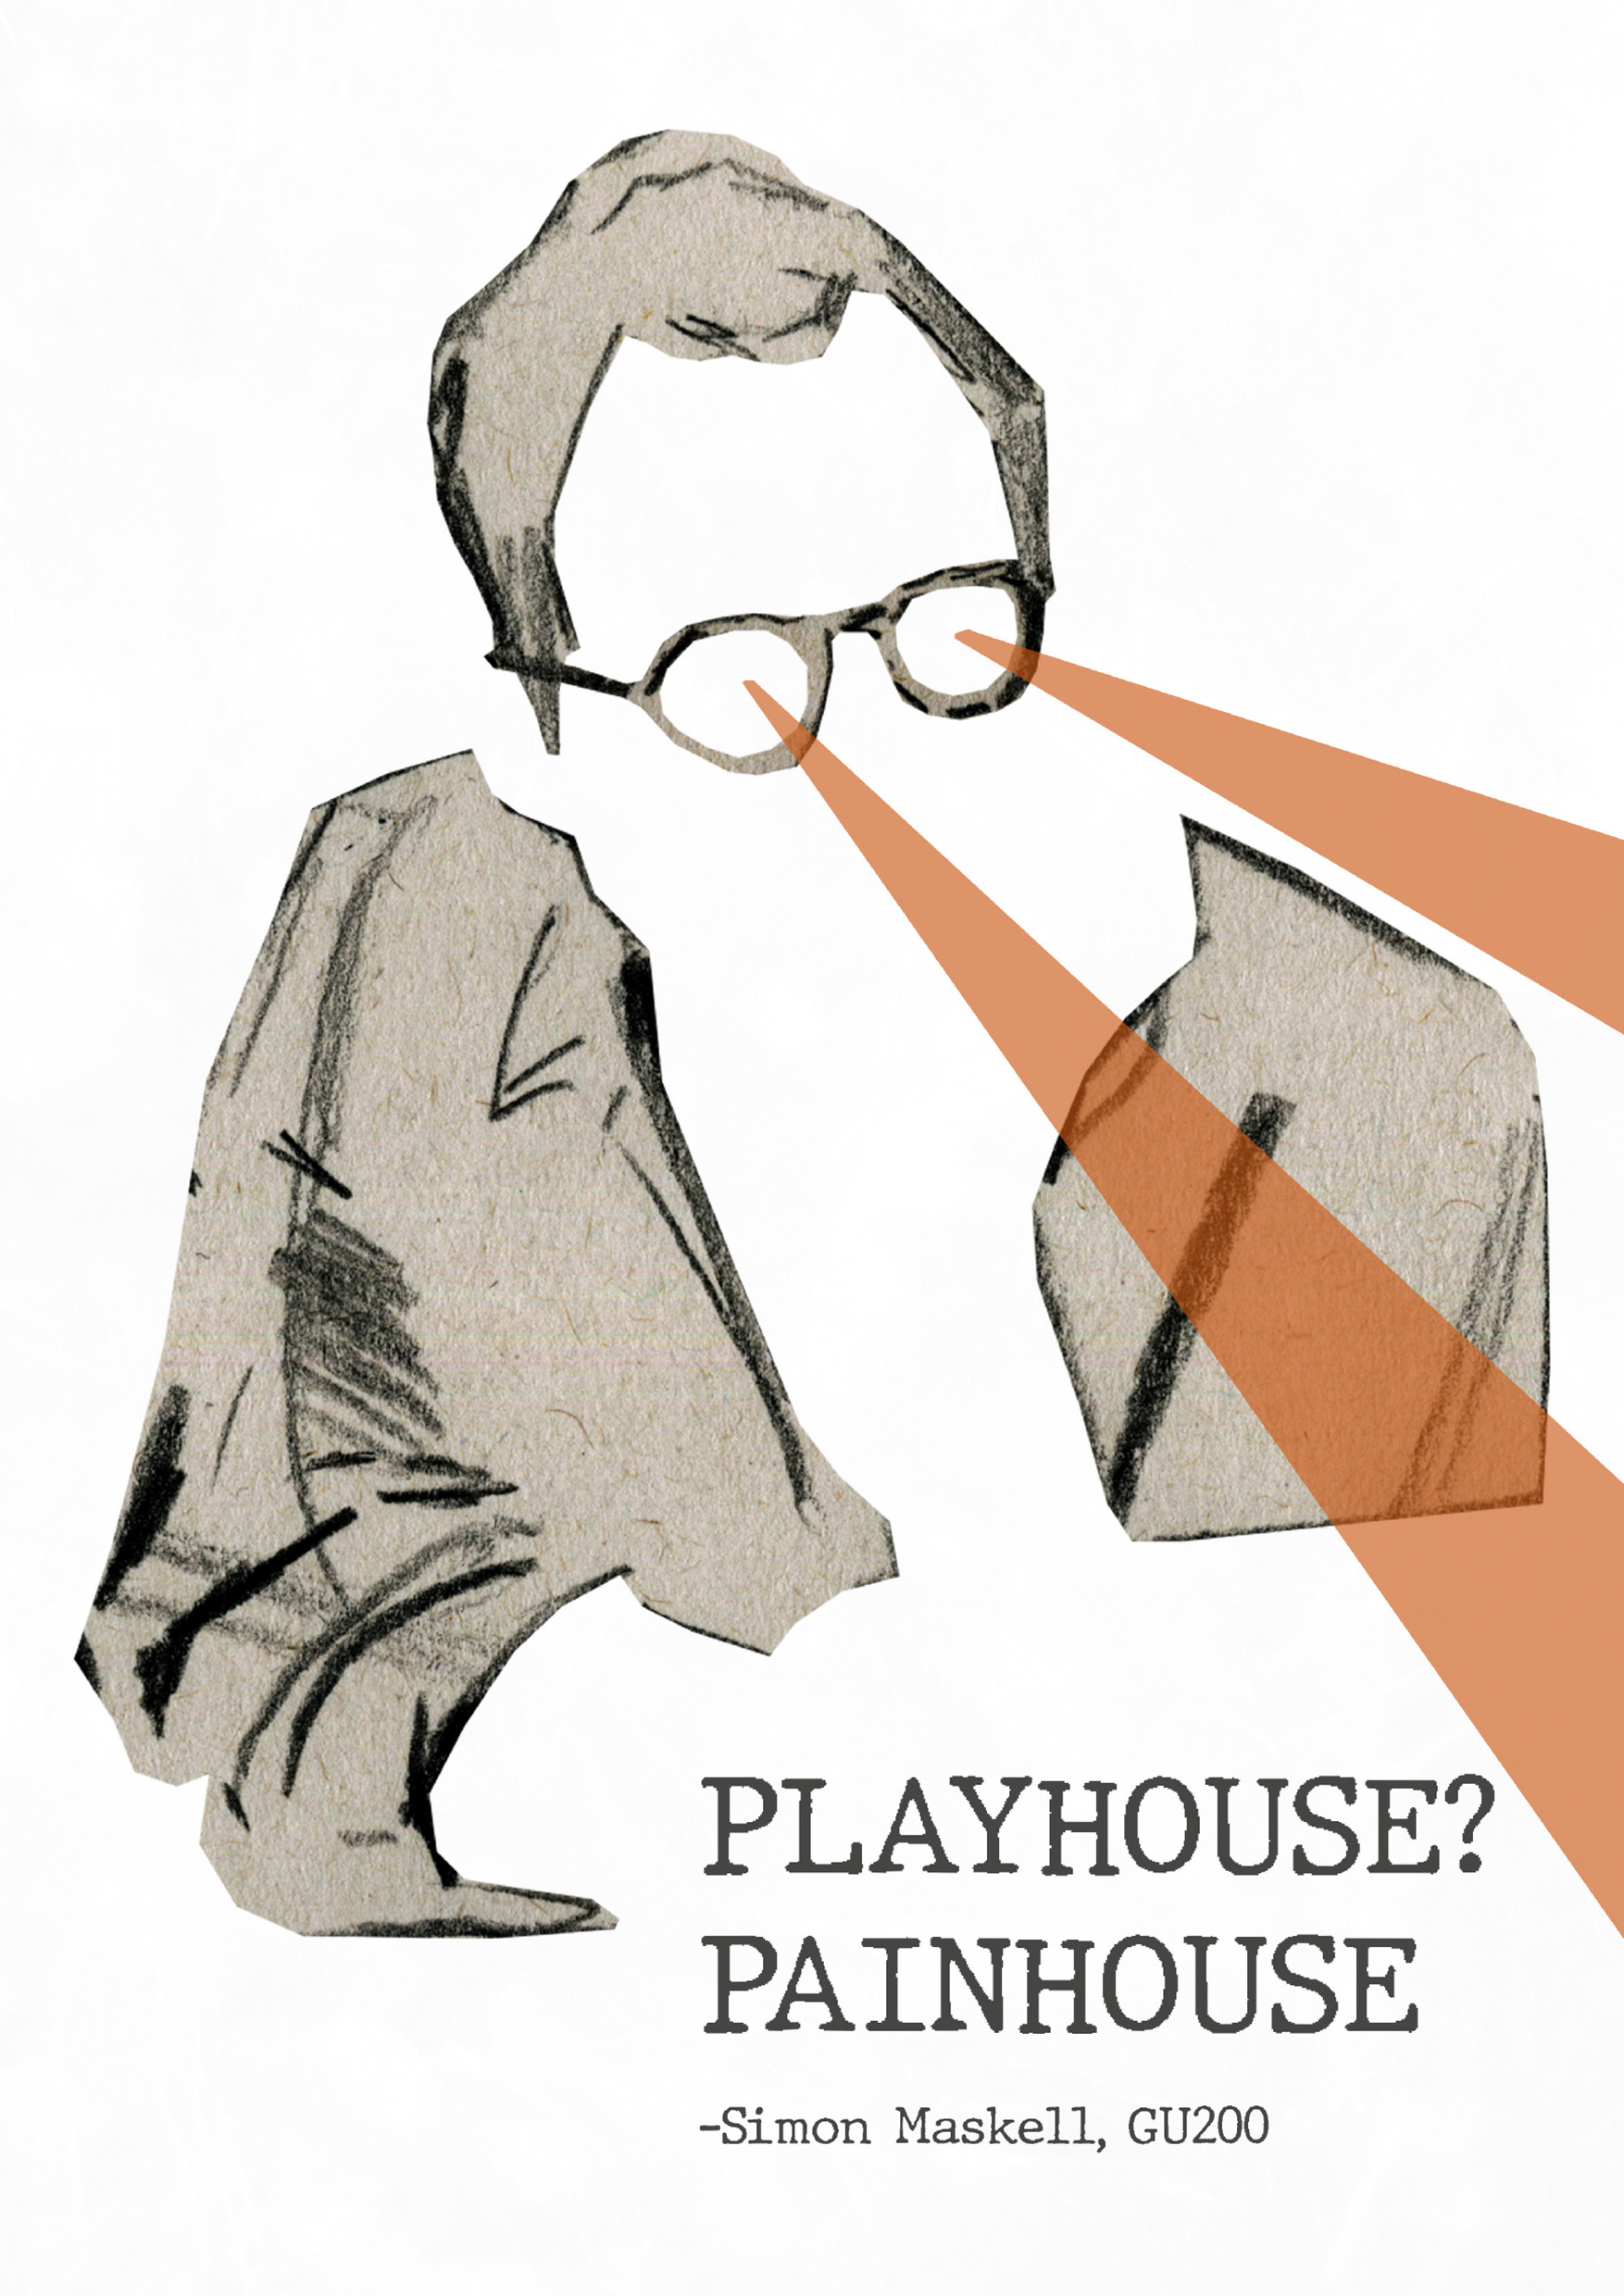 'PLAYHOUSE? PAINHOUSE' zine front cover by Simon Maskell, showing a man wearing glasses shooting lasers from his eyes, done in a simple and graphic style.